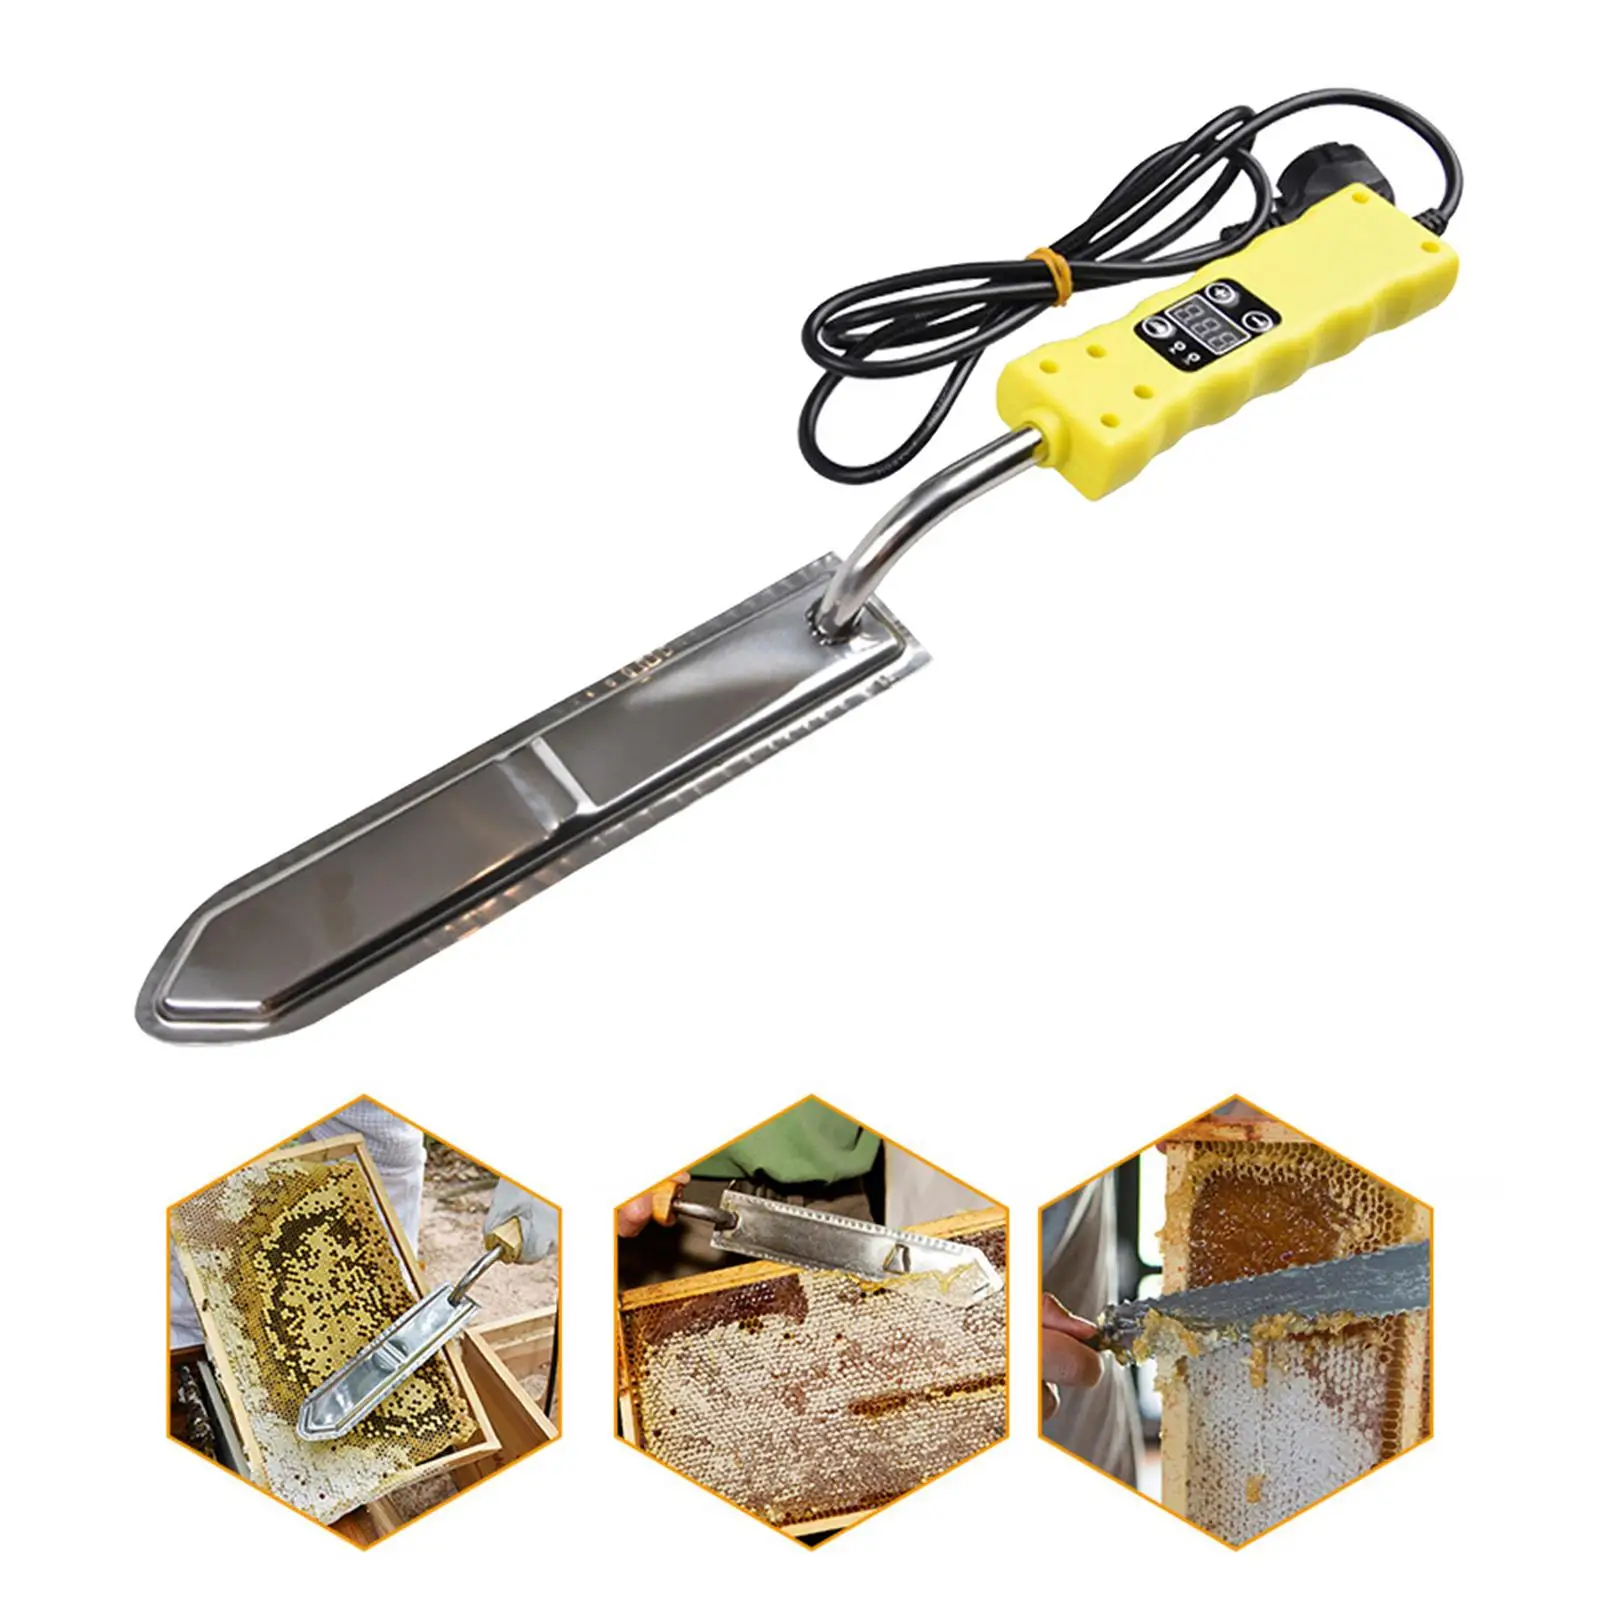 1Pcs Temperature Control Electric Cutting Honey Knife 0-180 Degrees Celsius Beekeeper Beekeeping Bee Tools